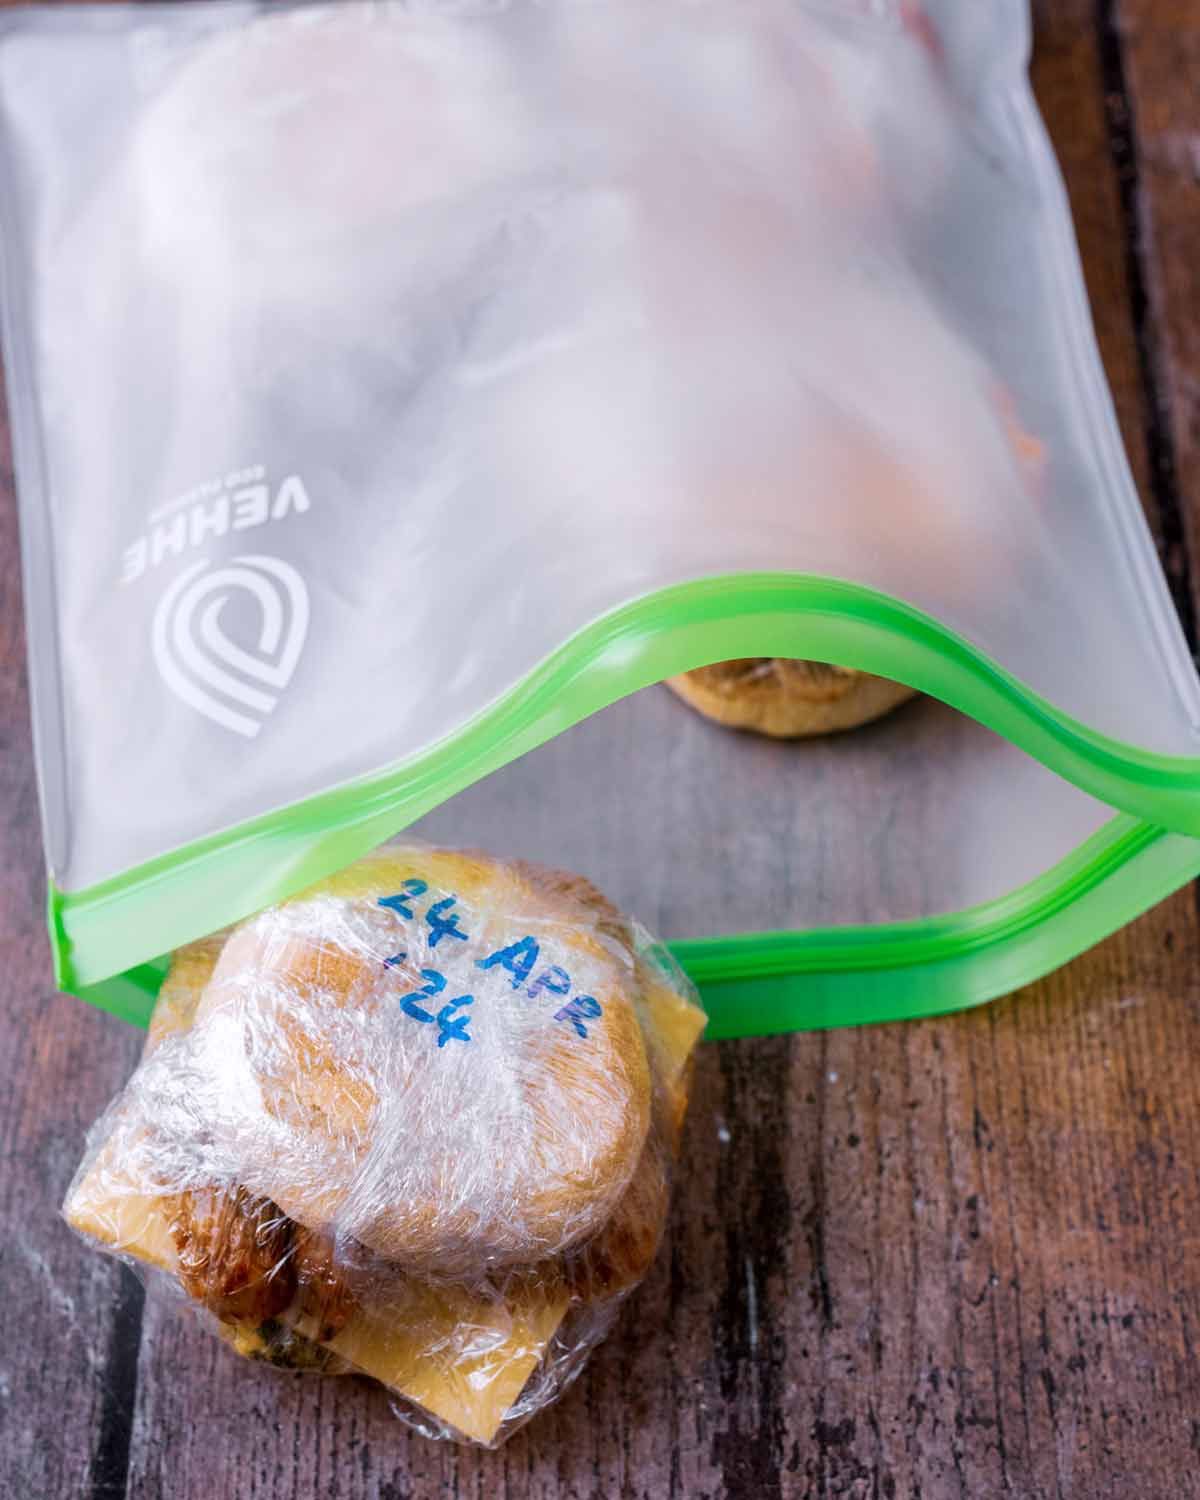 A resealable freezer bag with breakfast muffins in it.